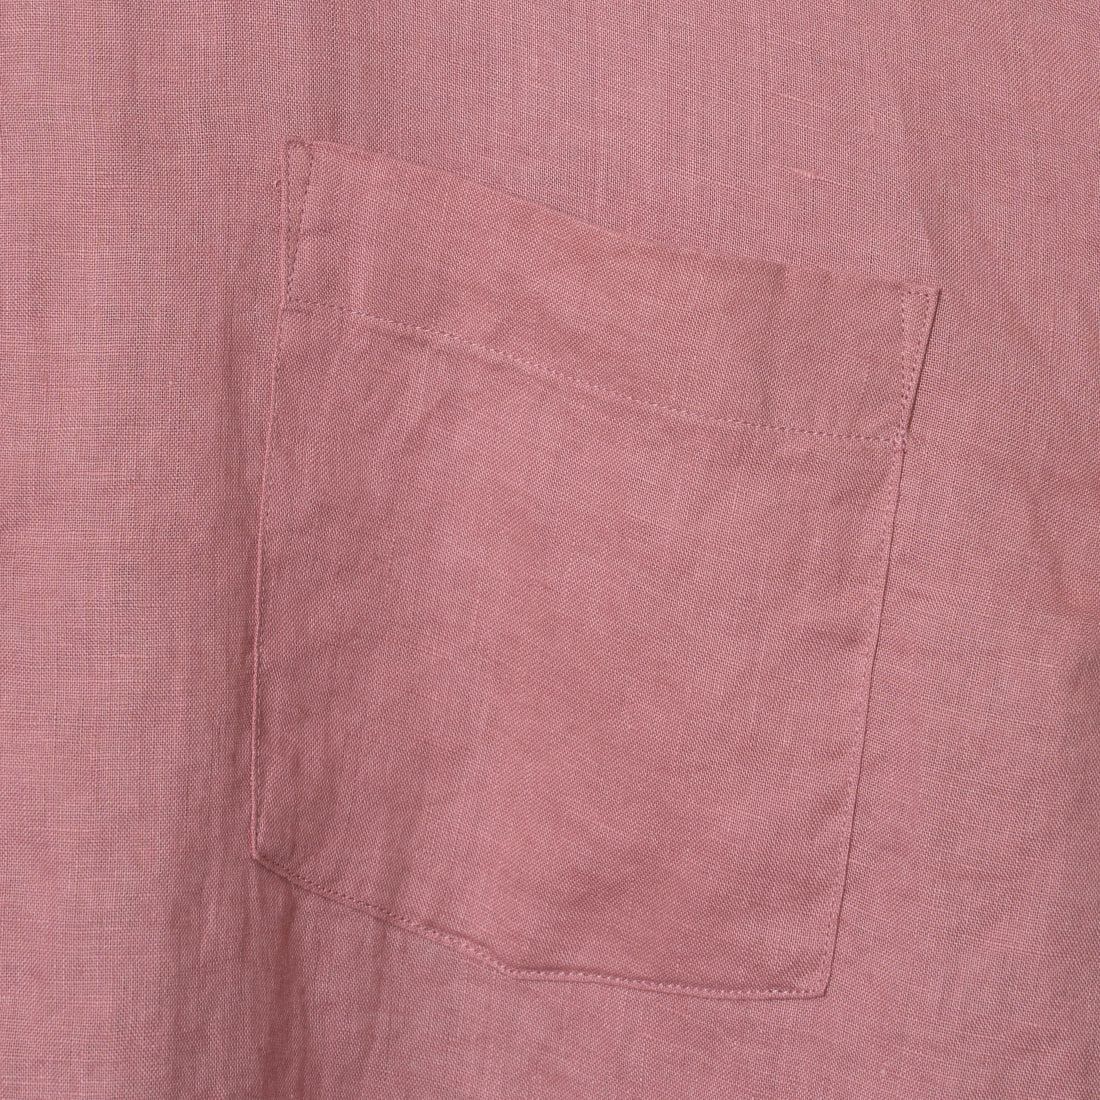 Jeans Factory Clothes [ジーンズファクトリークローズ] ロングスリーブ リネンシャツ [LFE100] 110 PINK